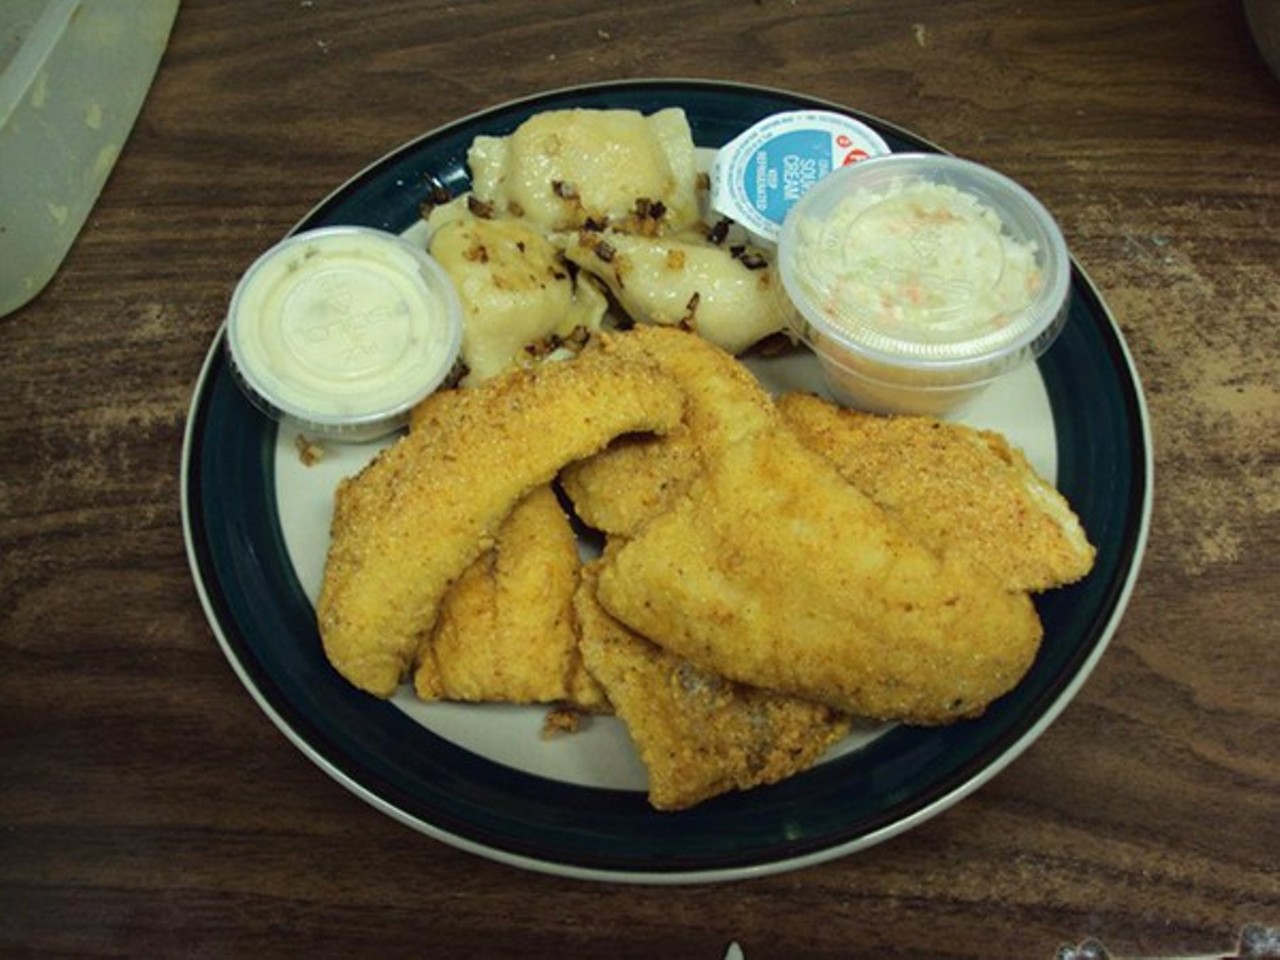 The Little Polish Diner - Big things come in small packages and that is so true at the Little Polish Diner in Parma. Try the fried flounder fish fry with cabbage and noodles instead of the fries. Stop in at 5772 Ridge Rd, Parma.